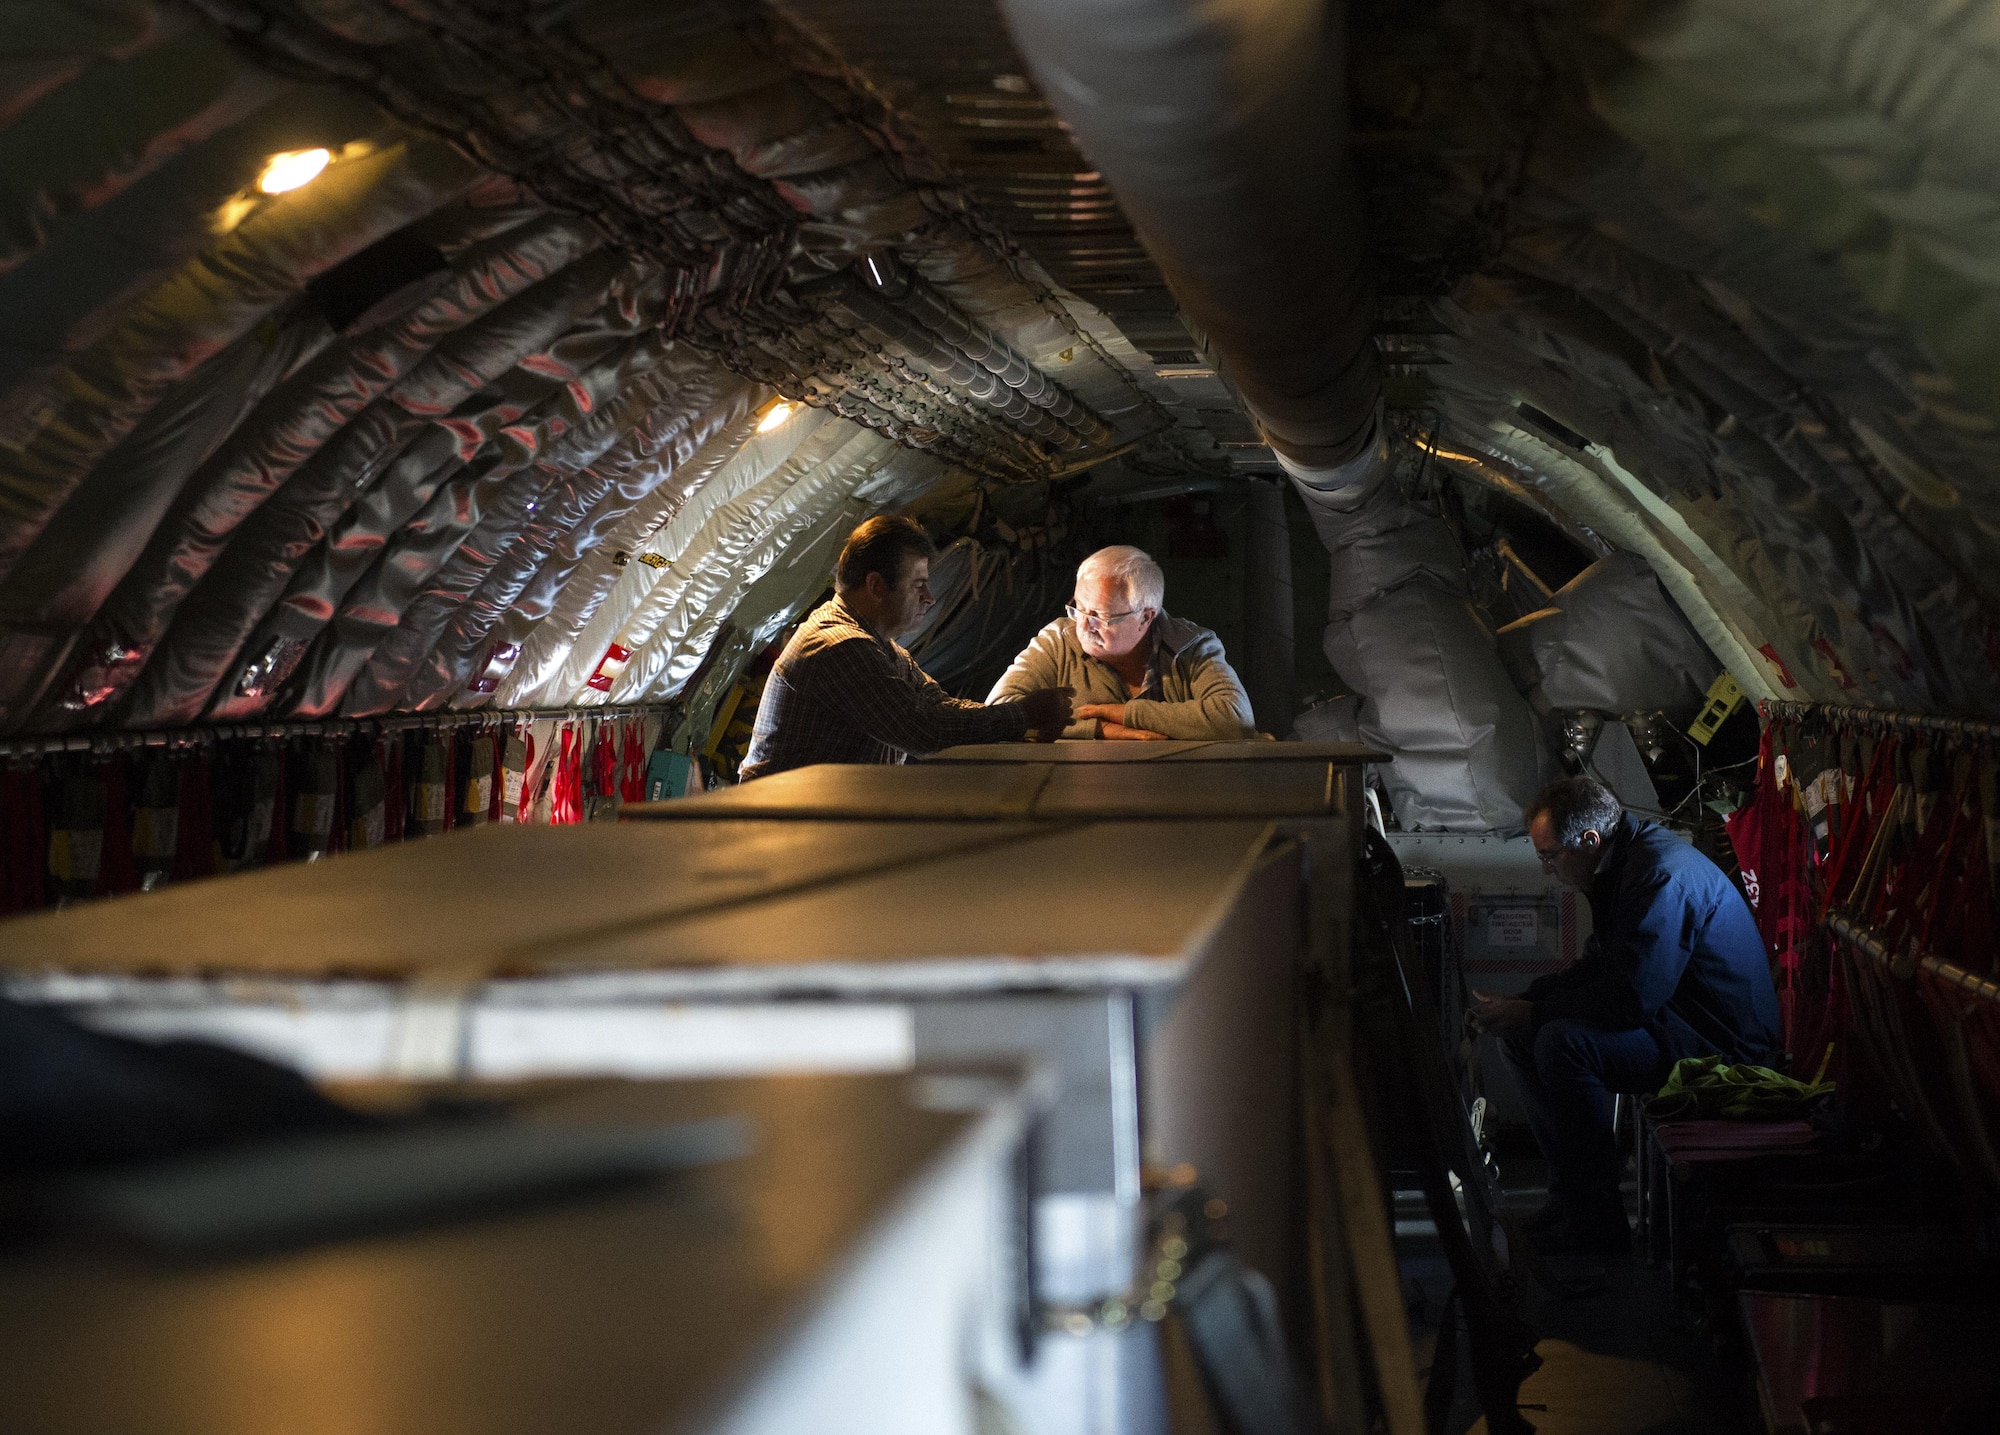 Saber civic leaders wait in a U.S. Air Force KC-135 Stratotanker from the 191st Air Refueling Squadron, Roland R. Wright Air National Guard Base, Utah, for an opportunity to see F-16 Fighting Falcons assigned to the 52nd Fighter Wing, Spangdahlem Air Base, Germany, during a refueling mission over Ramstein Air Base, Sept. 26, 2016. The Stratotanker carried and transferred more than 120,000 pounds of fuel to 13 F-16s during the course of two days. (U.S. Air Force photo/Airman 1st Class Preston Cherry)